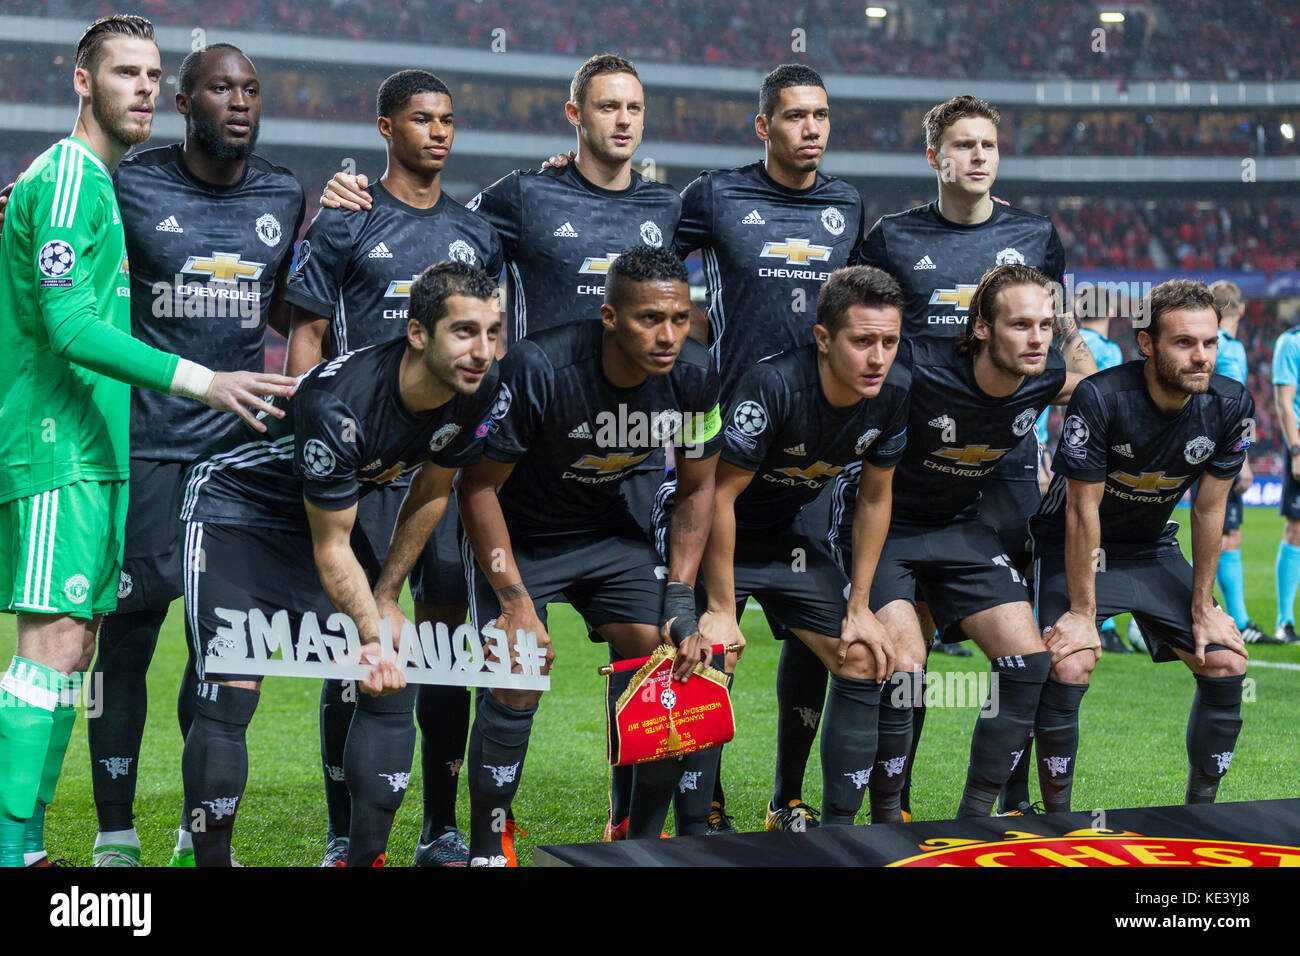 Lisbon, Portugal. 18th Oct, 2017. October 18, 2017. Lisbon, Portugal. Manchester United starting team for the game of the 3rd round of the UEFA Champions League Group A, SL Benfica v Manchester United FC Credit: Alexandre de Sousa/Alamy Live News Stock Photo